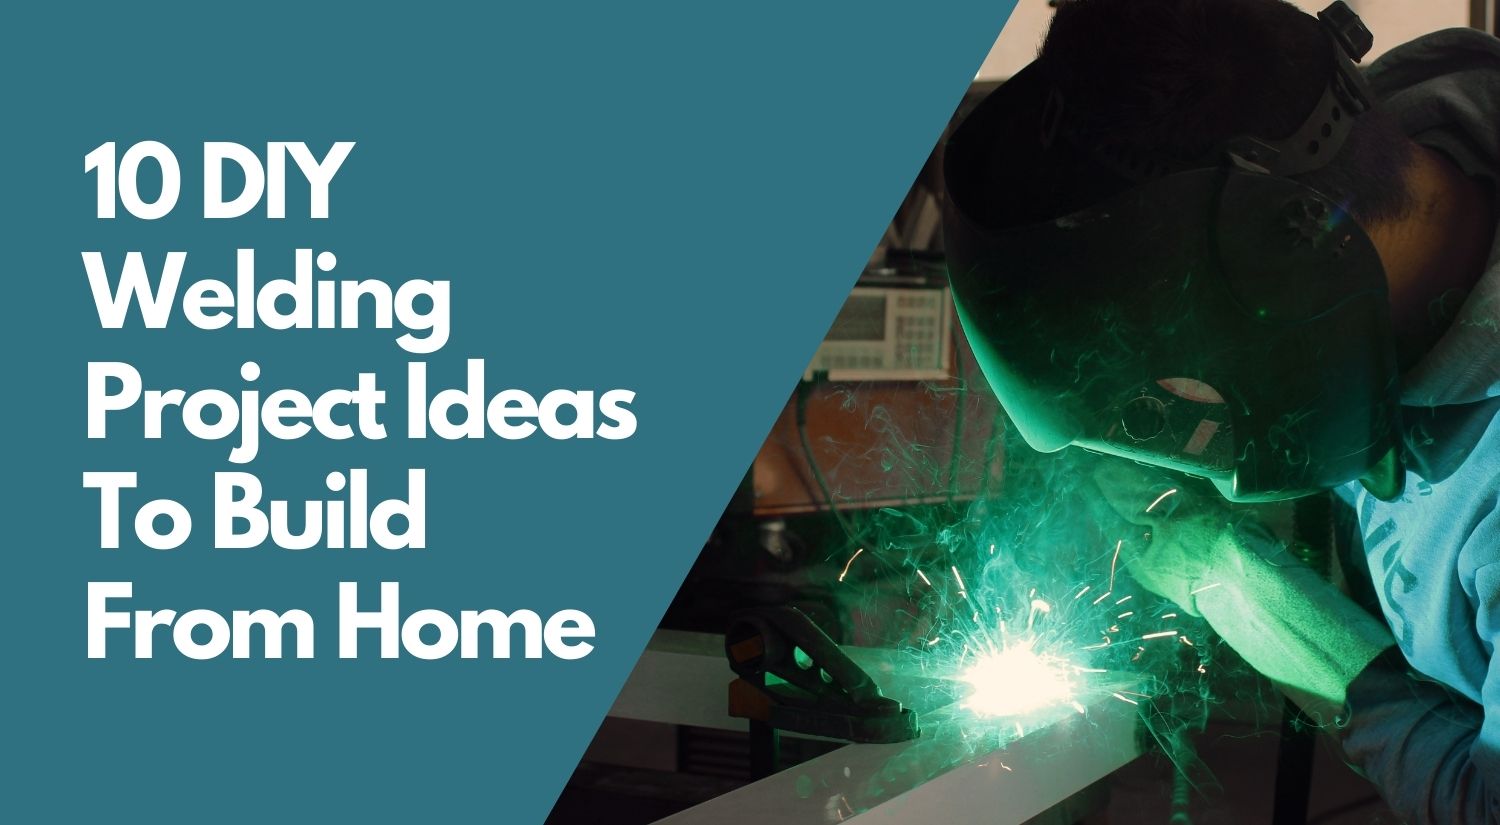 10 DIY Welding Project Ideas To Build From Home